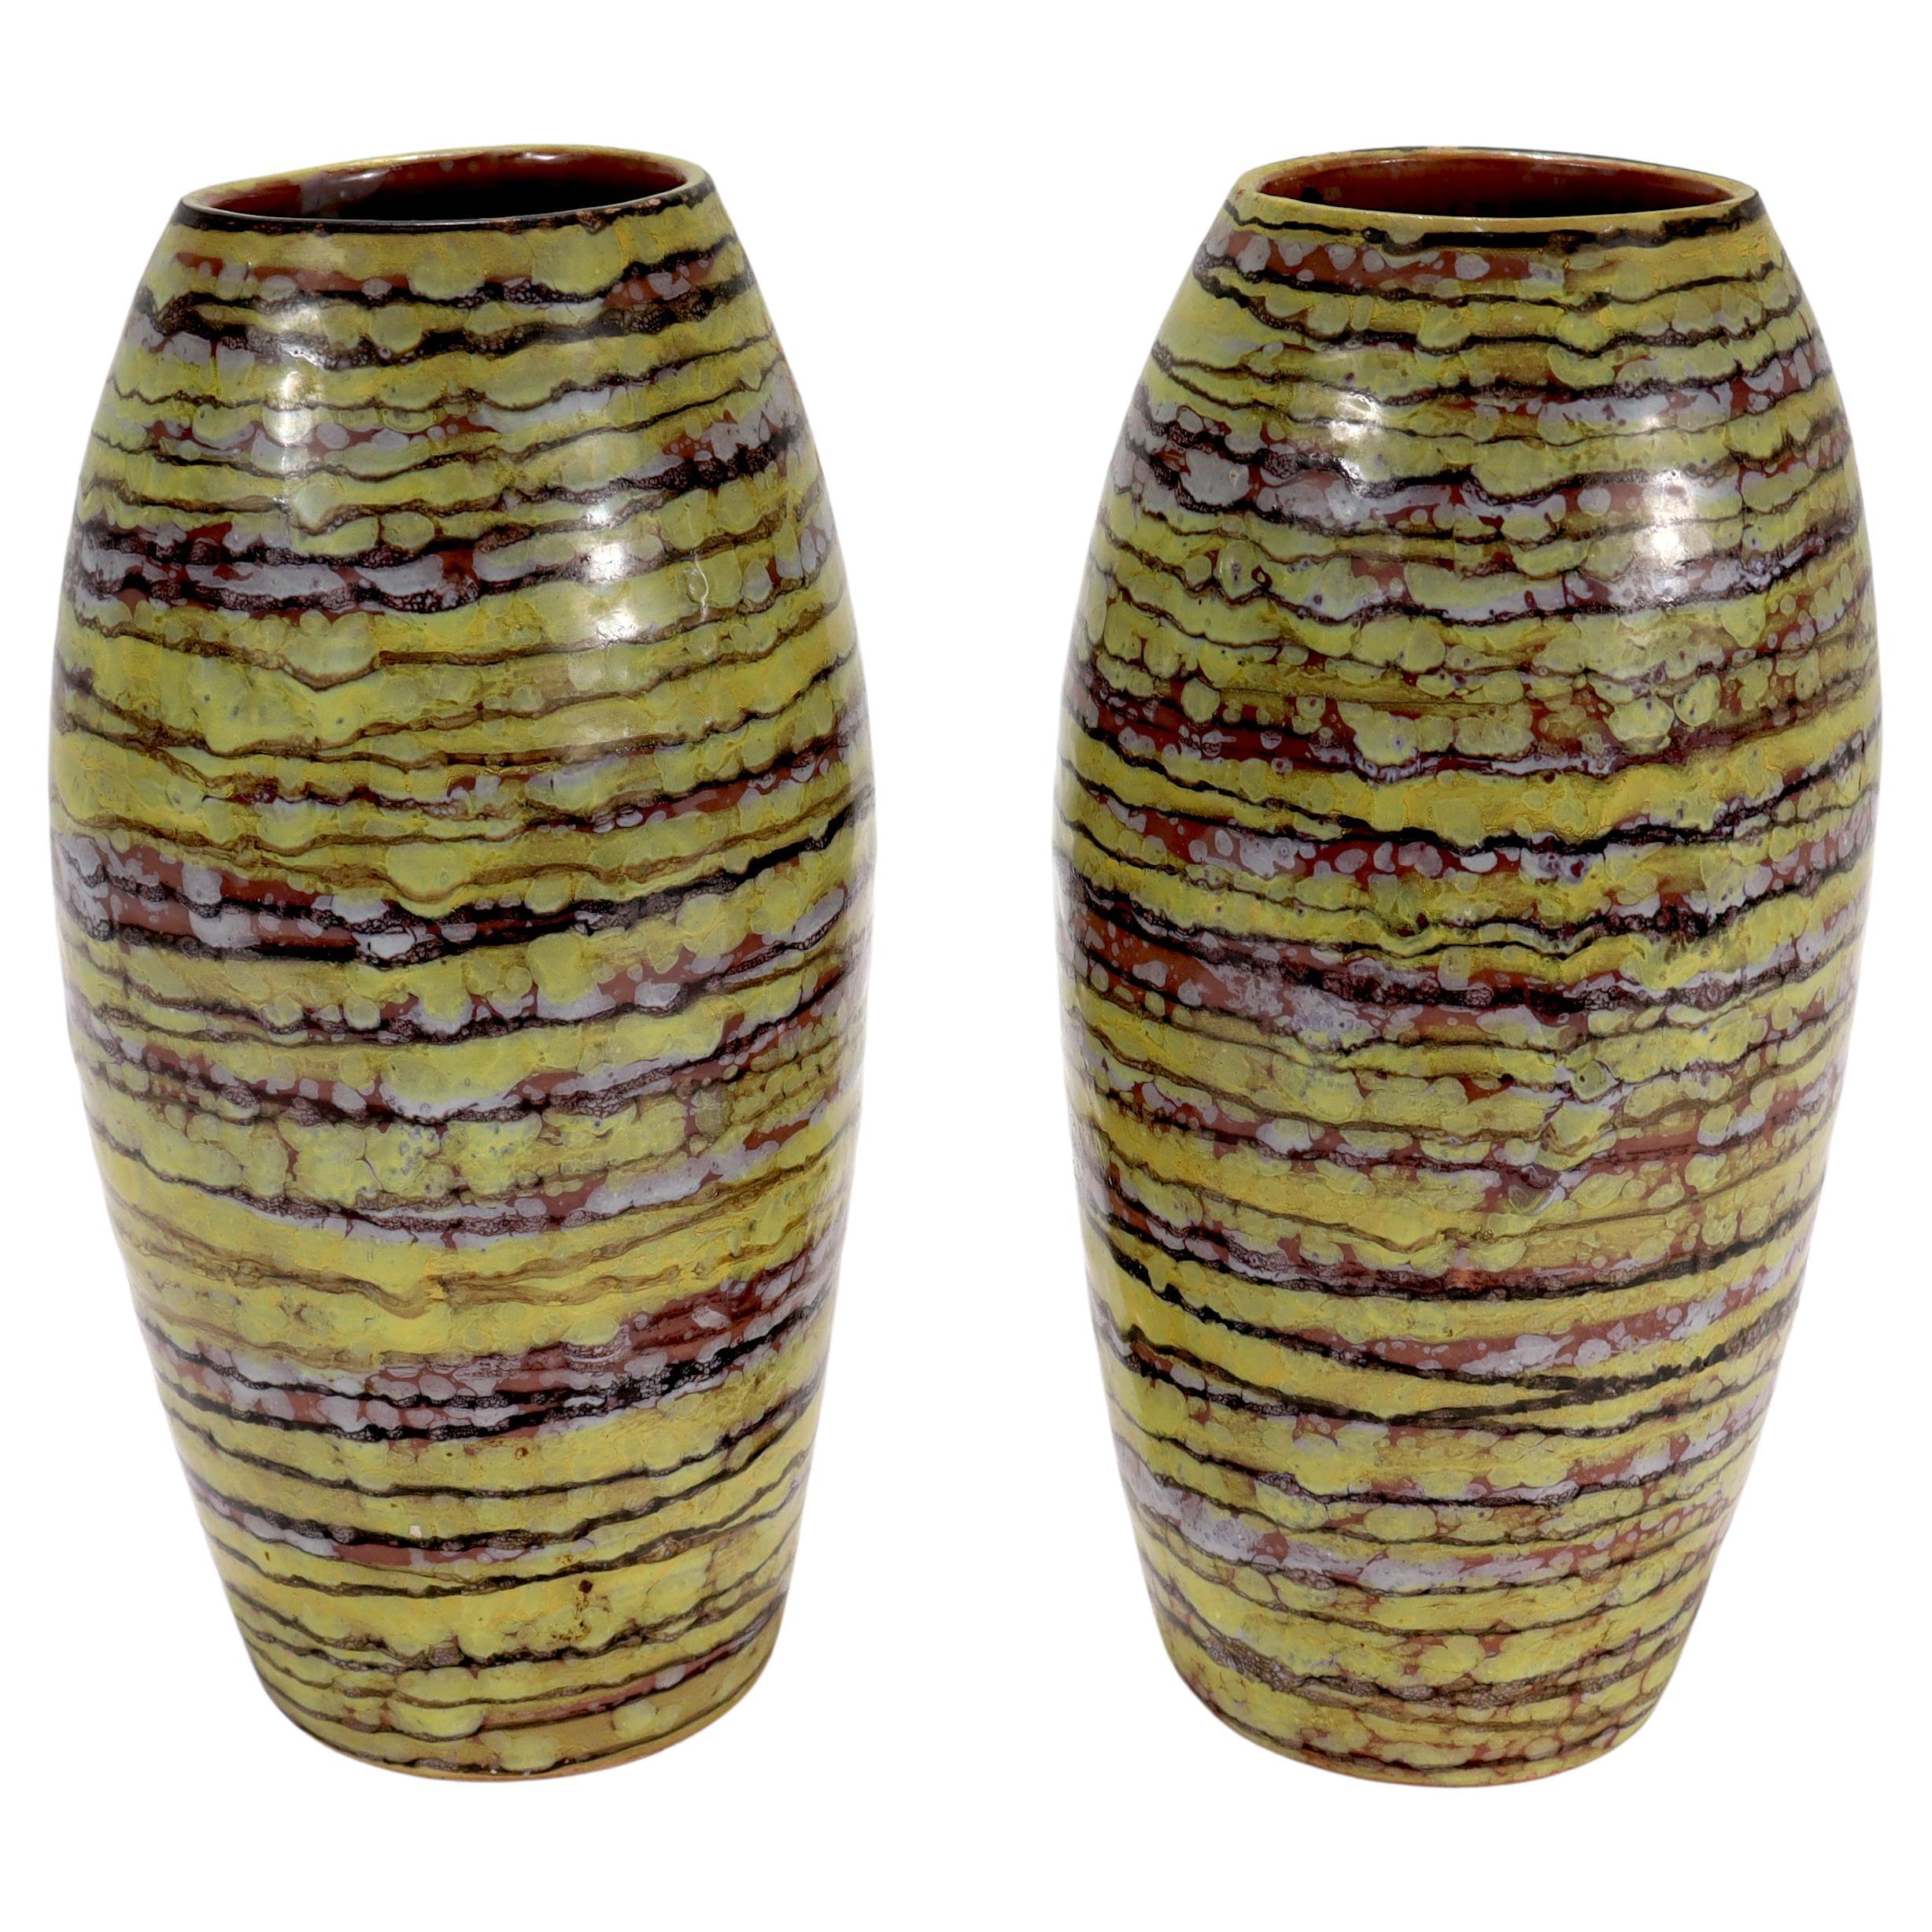 A fine pair of Mid-Century Modern Italian terracotta vases.

Both vases have primarily yellow glazes, with stripes of brownish-red and spots of white.

In the style of Guido Gambone or Marcello Fantoni

Marked to the base 